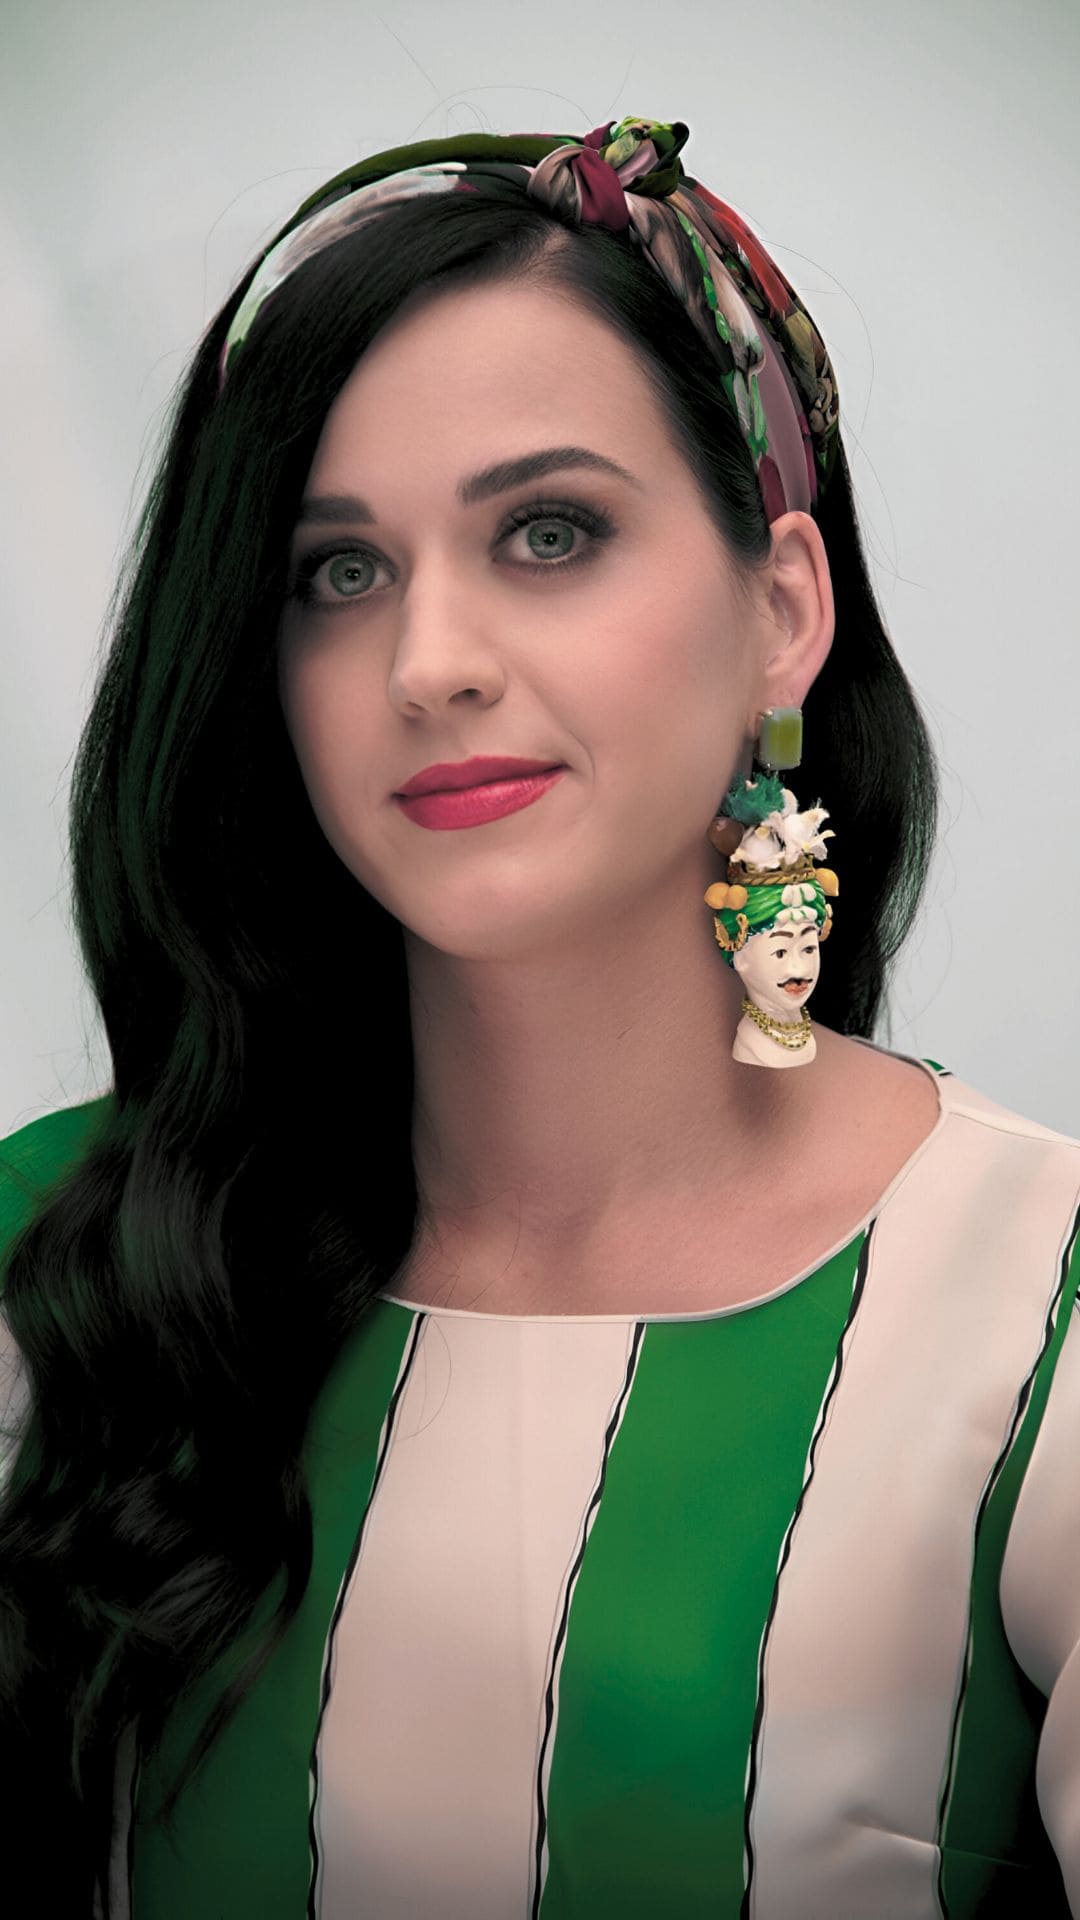 Katy Perry Wallpaper HD For Mobile